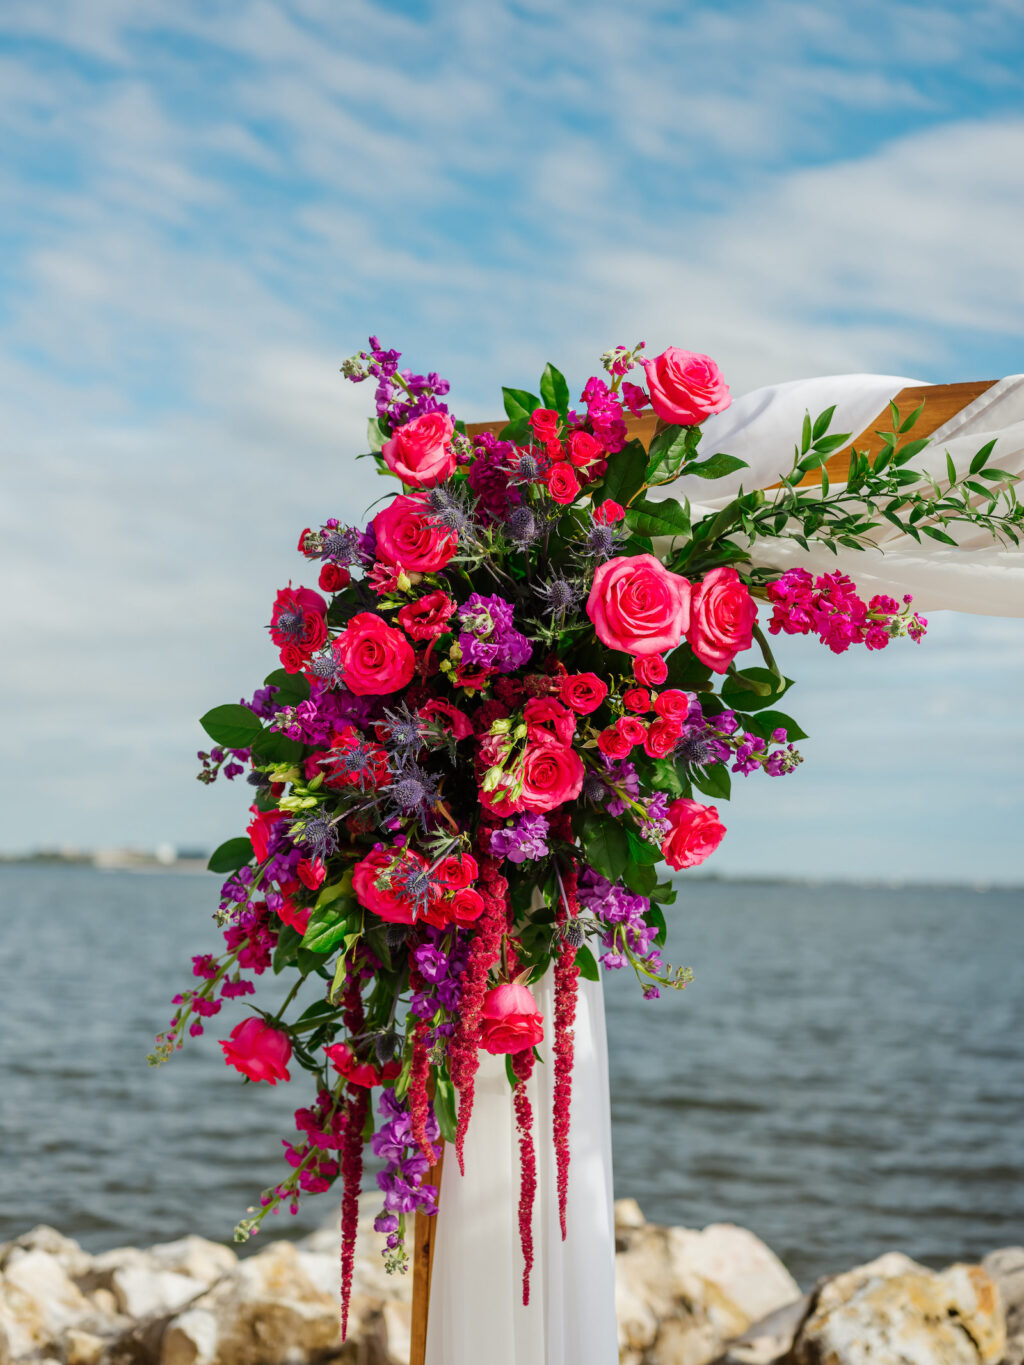 Beach Waterfront Wedding Ceremony Decor, Arch with White Linen Draping, Jewel Tone Pink Roses and Purple Flowers, Hanging Amaranthus Floral Arrangement | Tampa Bay Wedding Planner Perfecting the Plan | Wedding Florist Iza's Flowers | Wedding Venue The Current Hotel Tampa